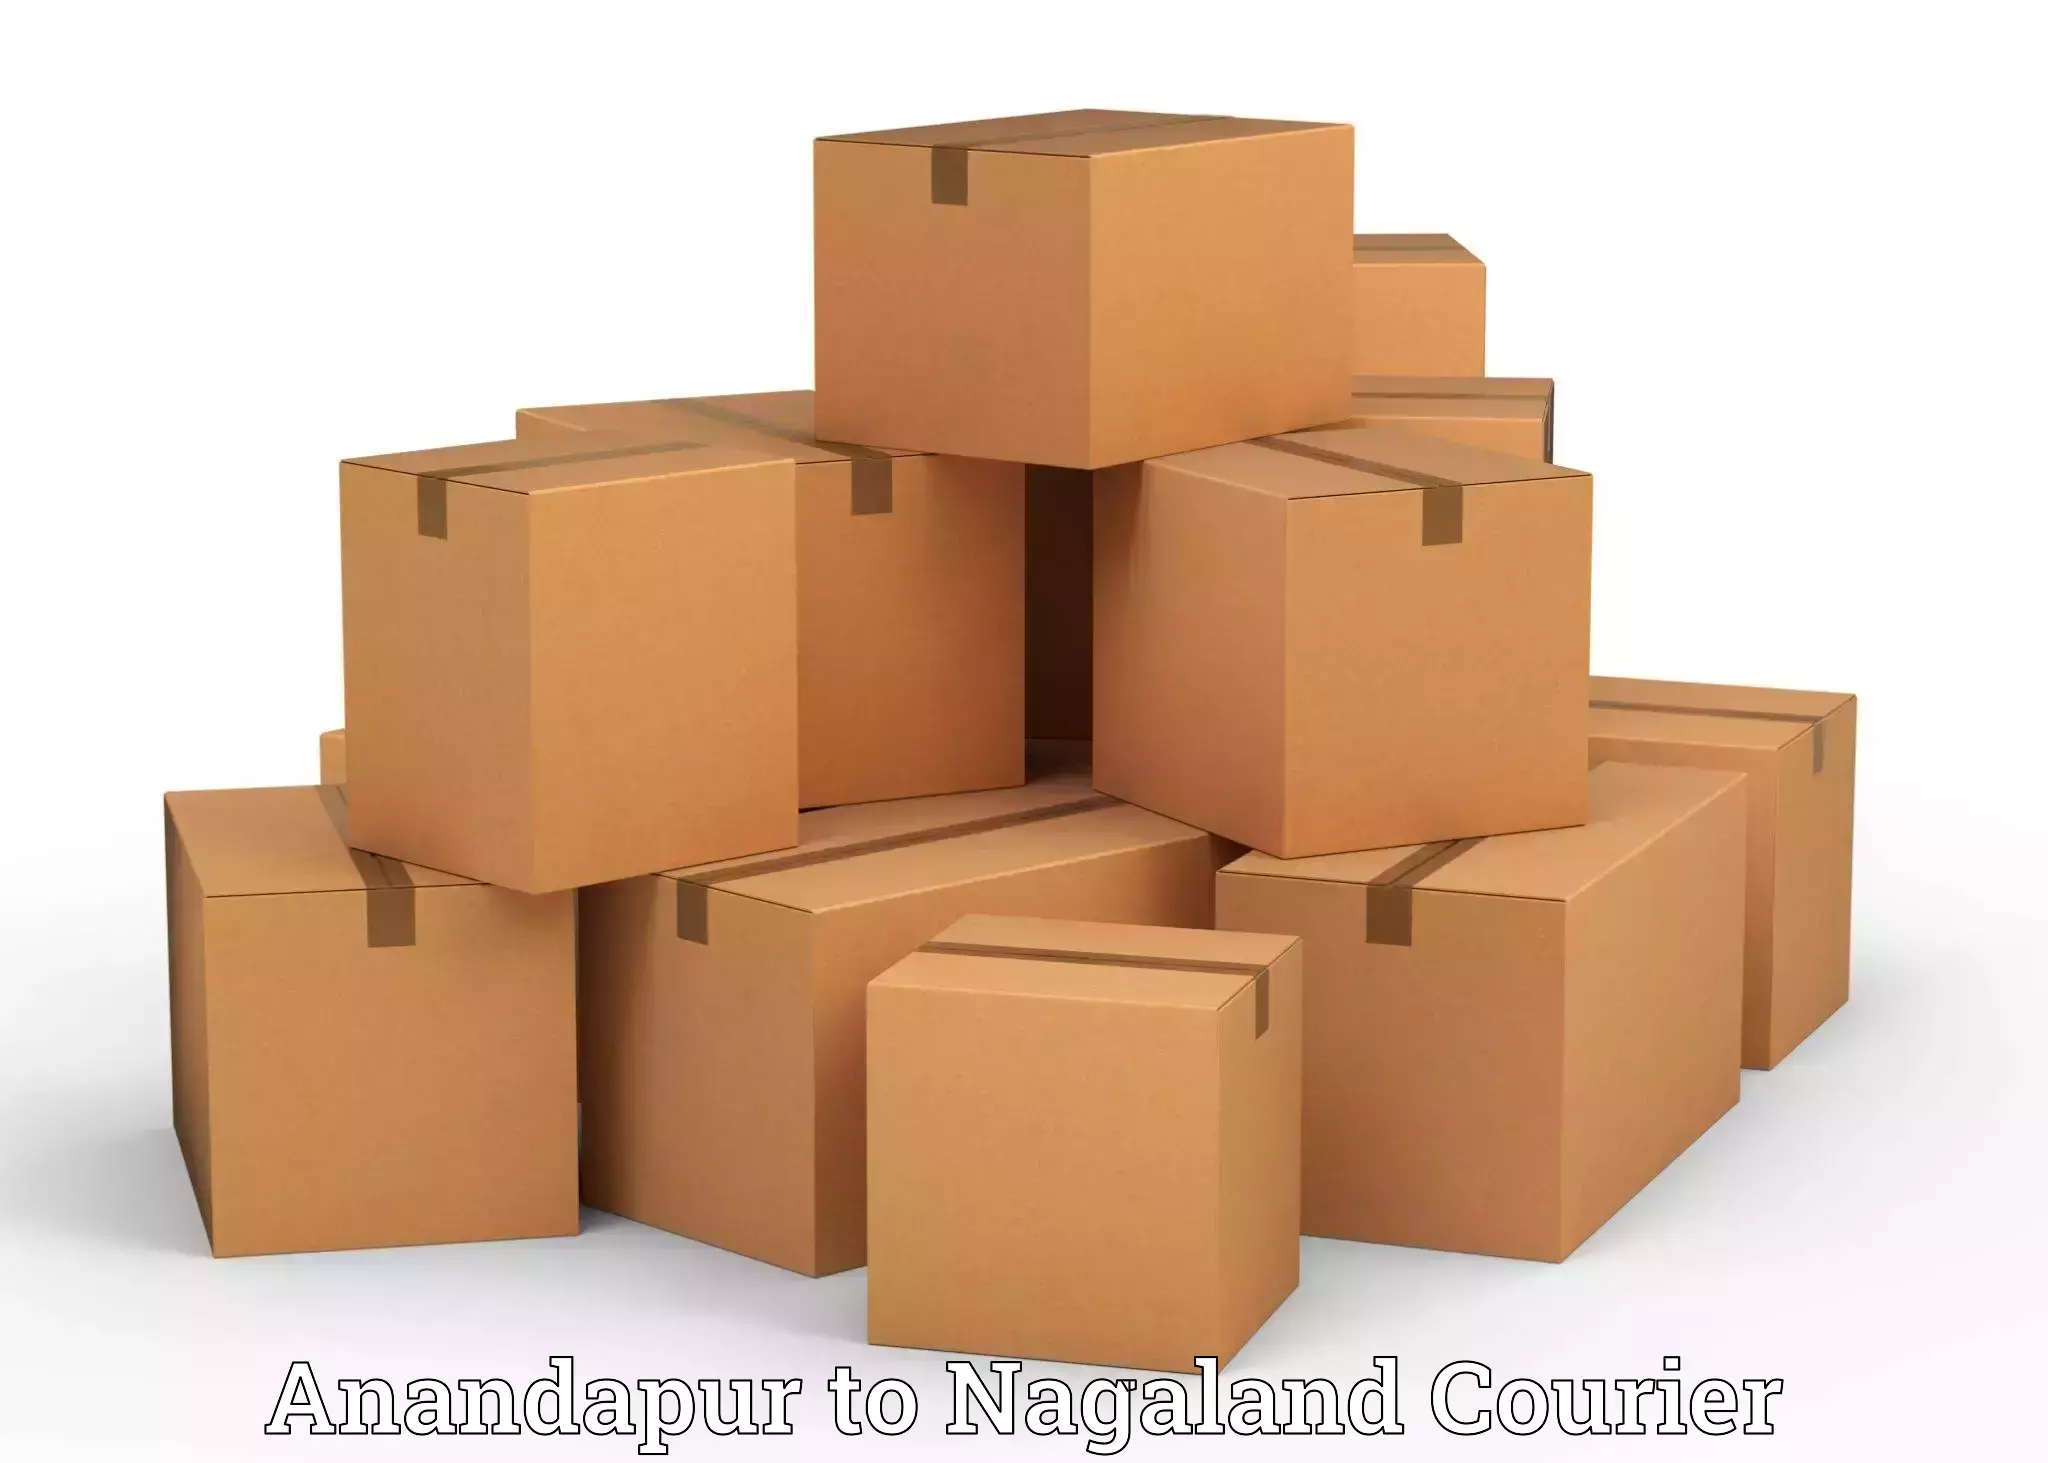 Furniture delivery service Anandapur to Nagaland